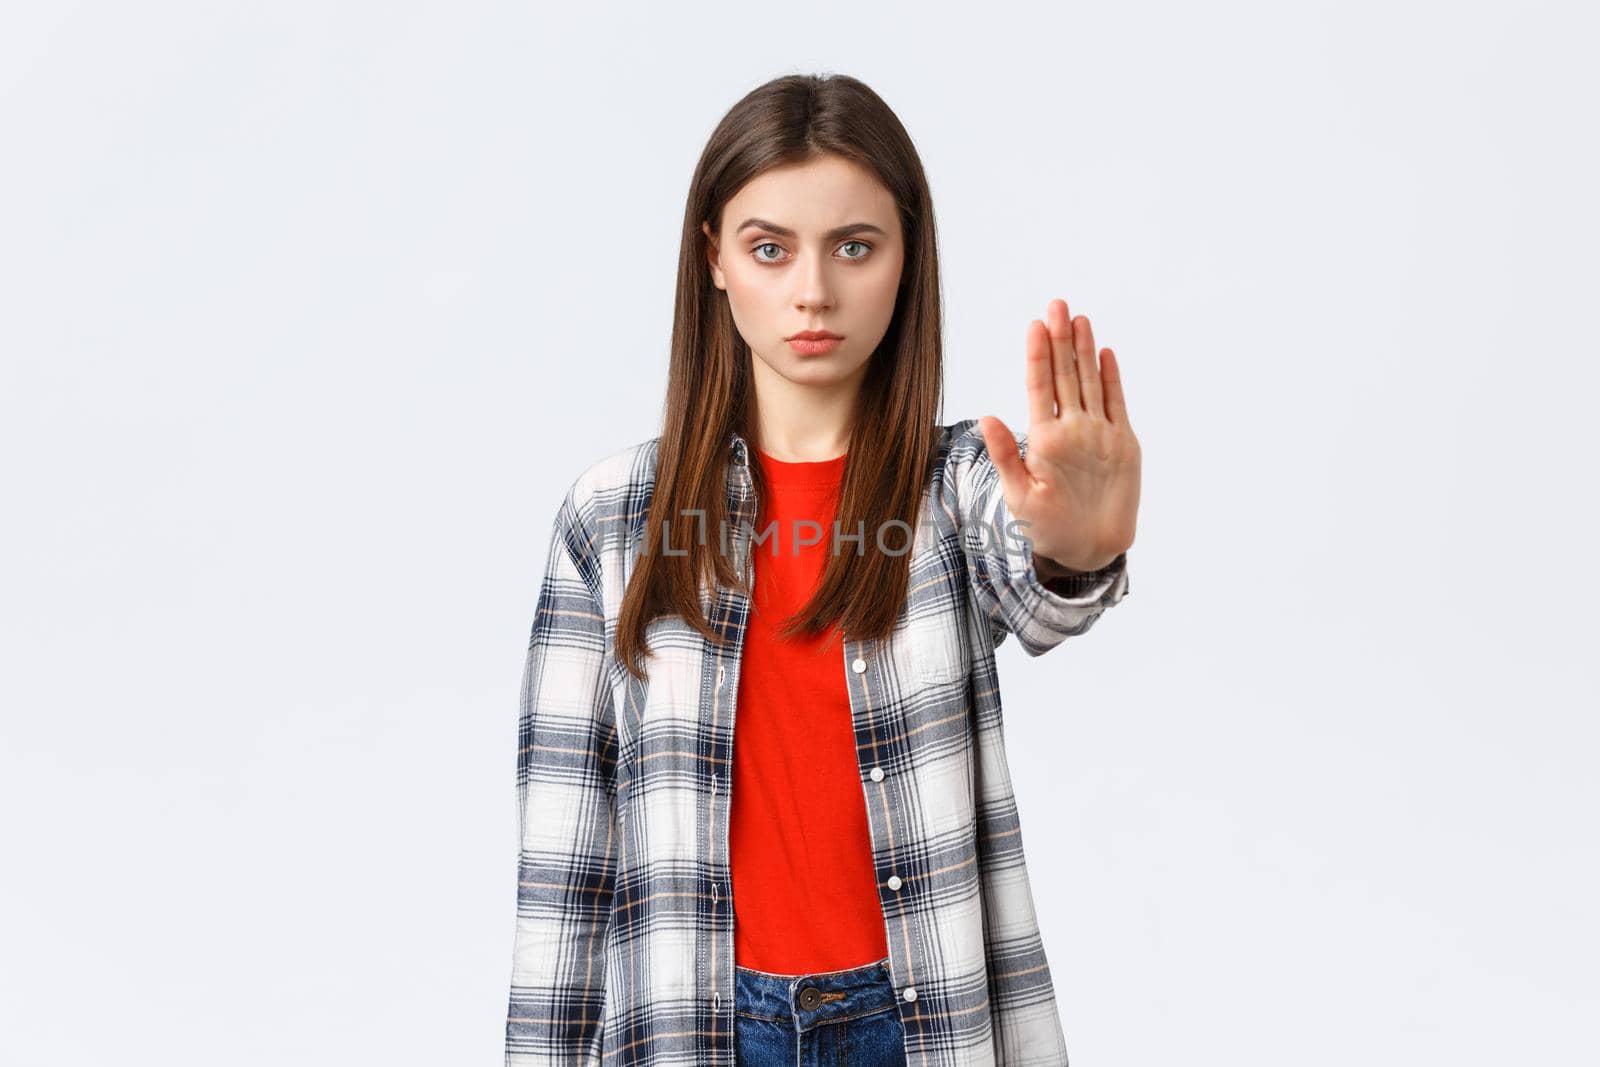 Lifestyle, different emotions, leisure activities concept. Time to stop. Serious young woman in casual outfit, stretch hand forward to prohibit, restrict or forbid something, white background.